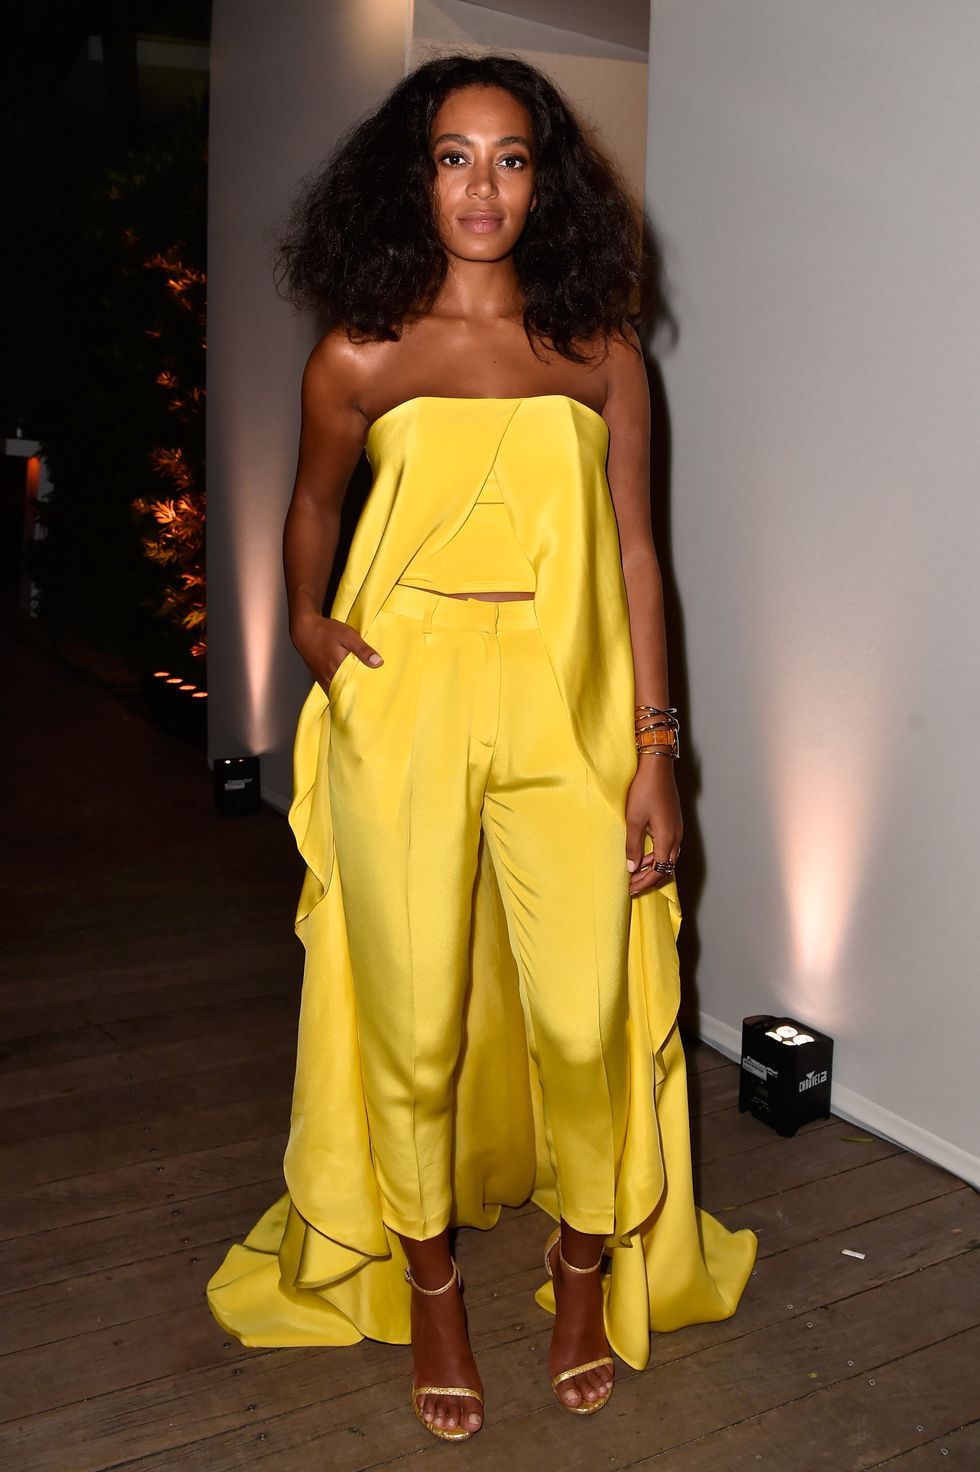 Solange Knowles wears an all yellow outfit